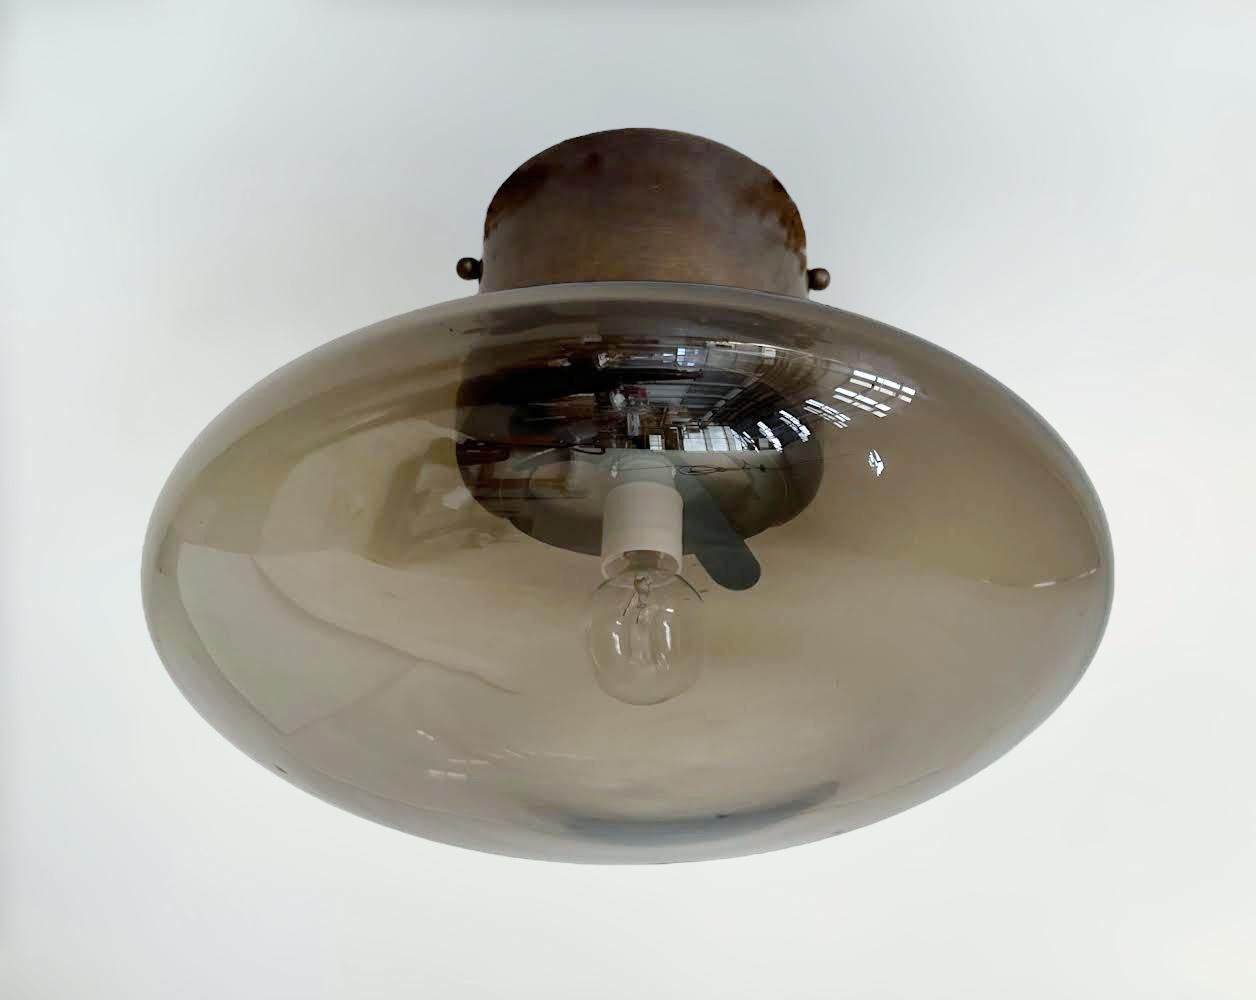 Italian flush mount with Murano glass shade and brass frame shown in bronzed finish / Made in Italy
Designed by Fabio Ltd, inspired by Angelo Lelli and Arredoluce styles
1 light / E12 or E14 type / max 40W each
Diameter: 12 inches / Height: 9.5